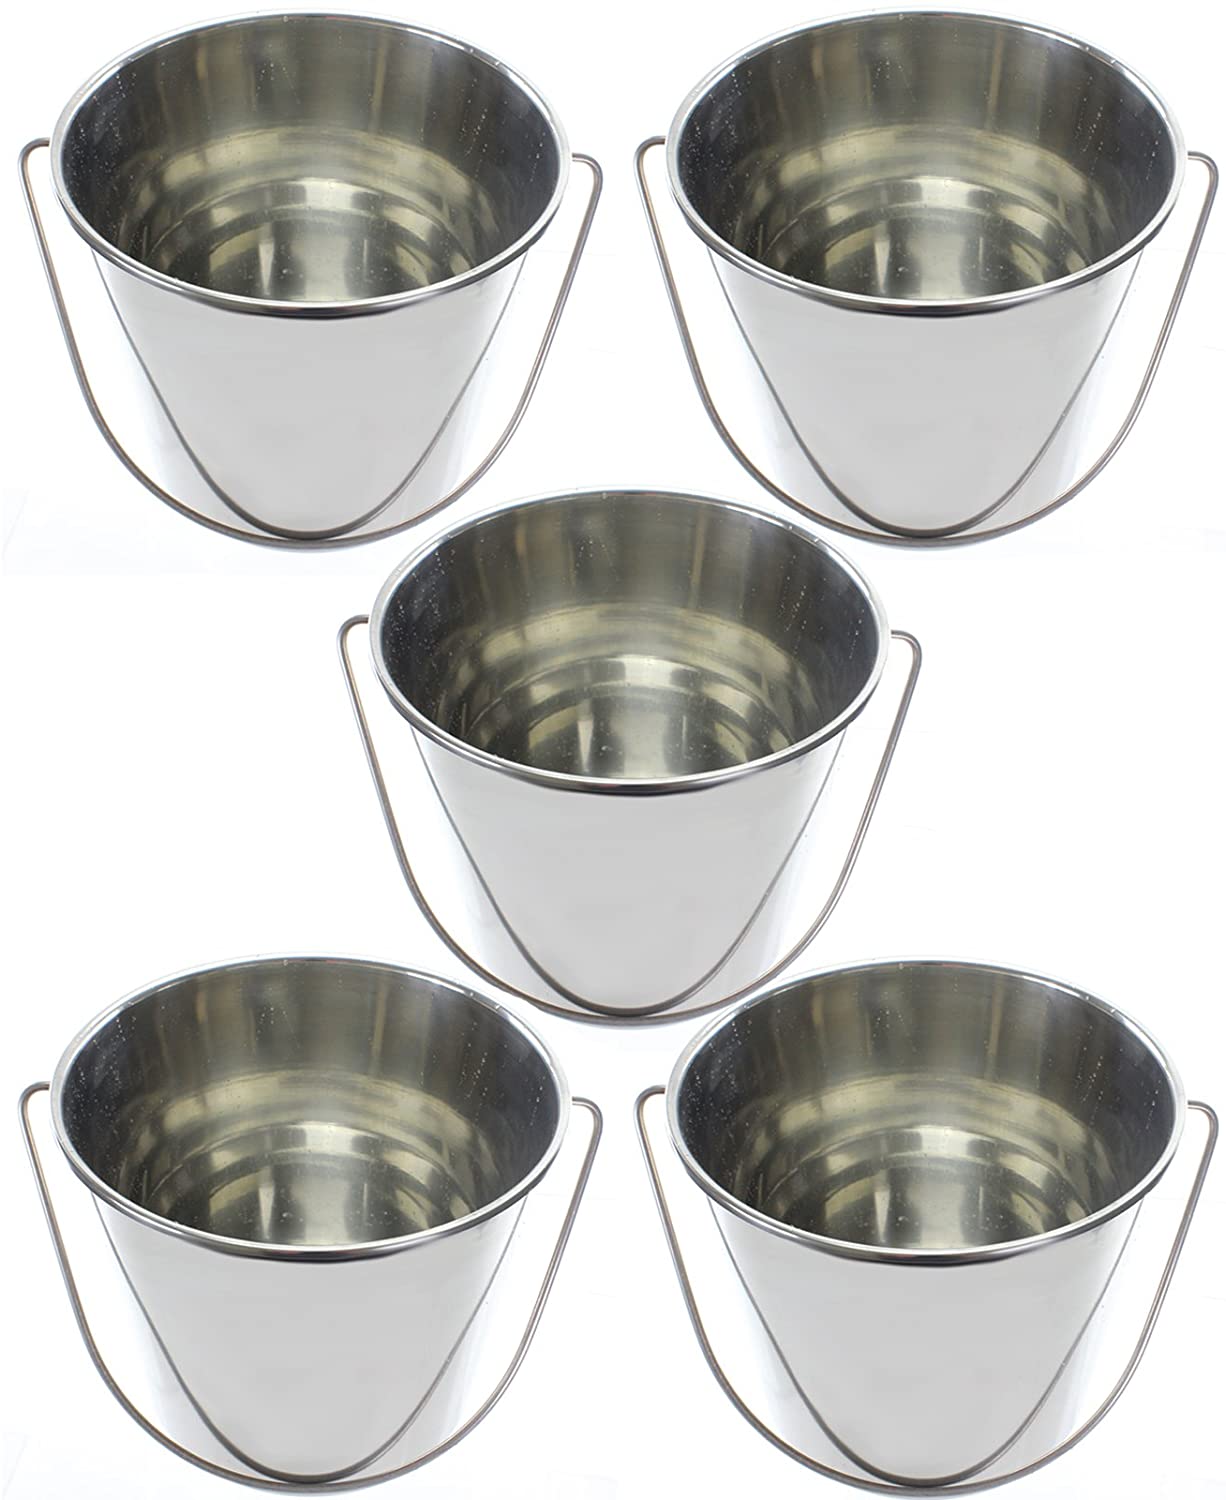 Catering Bucket, Pack of 5 Buckets